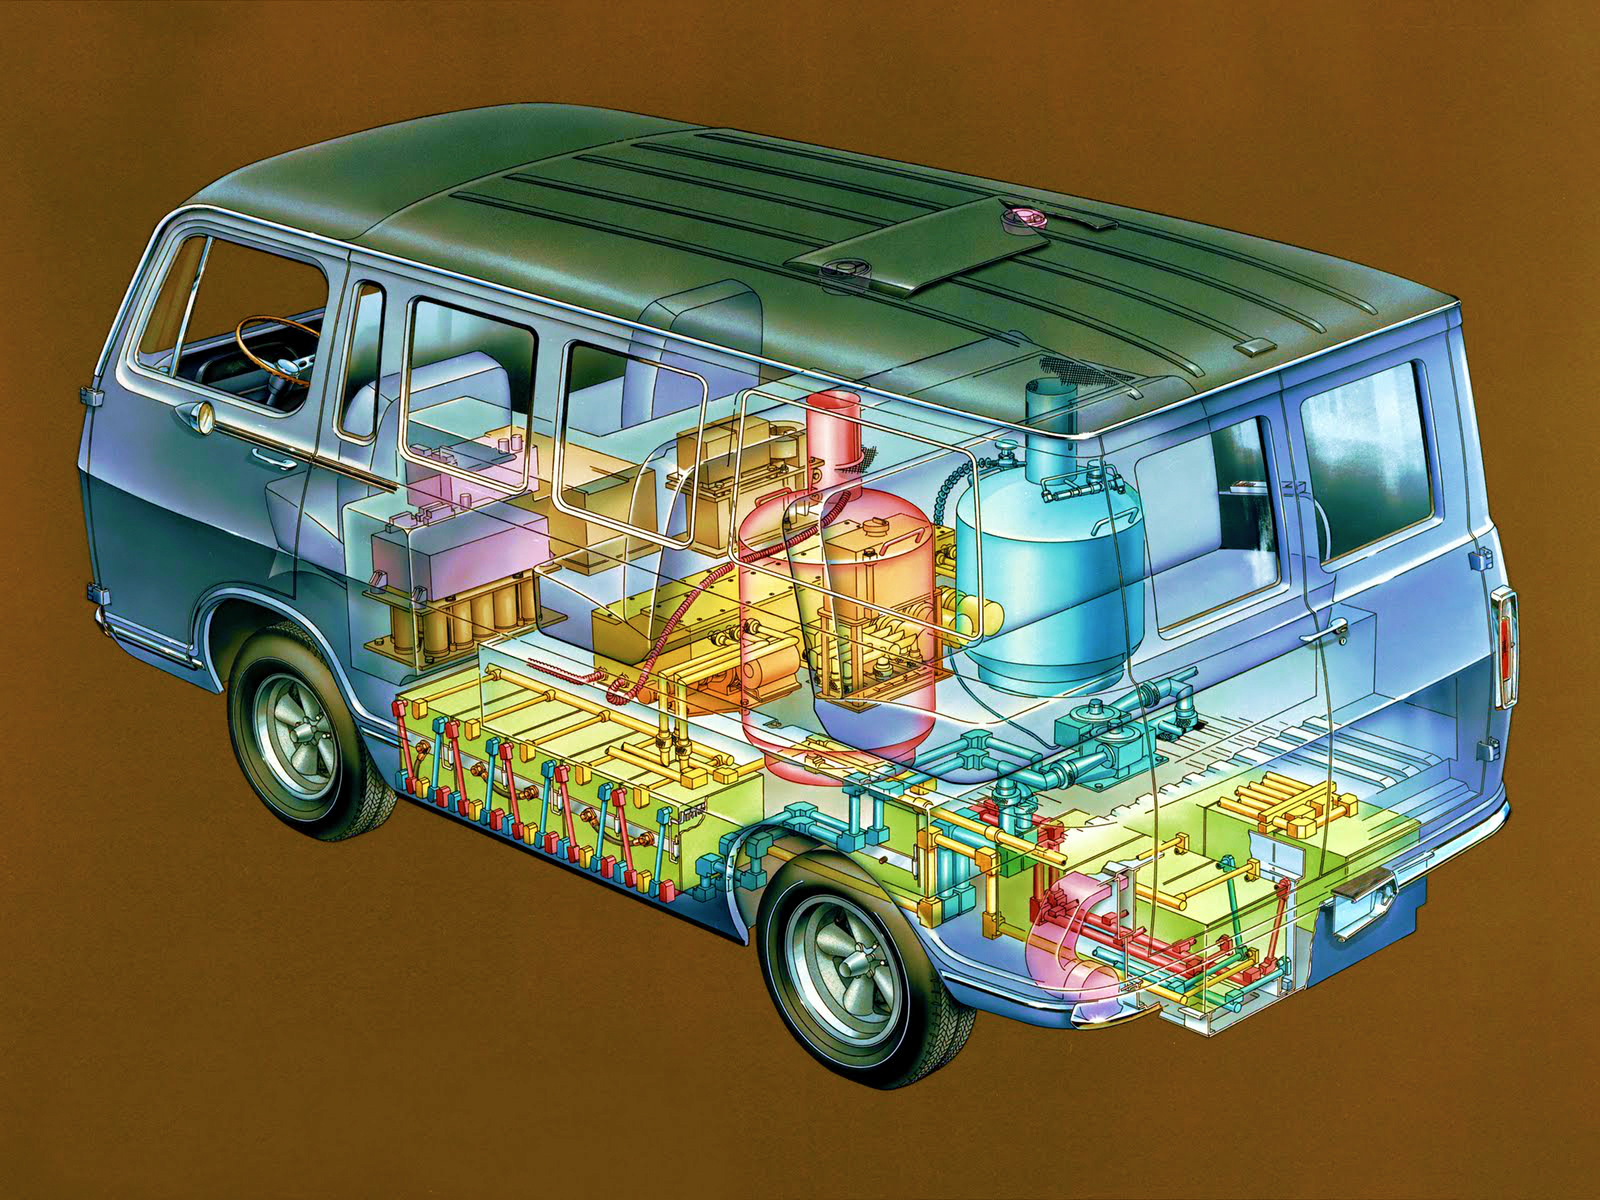 The General Motors Electrovan celebrates its 50th anniversary as the world’s first hydrogen-power fuel cell vehicle in October. It was the first transfer of fuel cell technology from President John F. Kennedy’s challenge to NASA to safely land a man on the moon by the end of the 1960s. This technical art shows the Electrovan’s interior crammed with fuel cell componentry that left room for only a driver and two passengers.